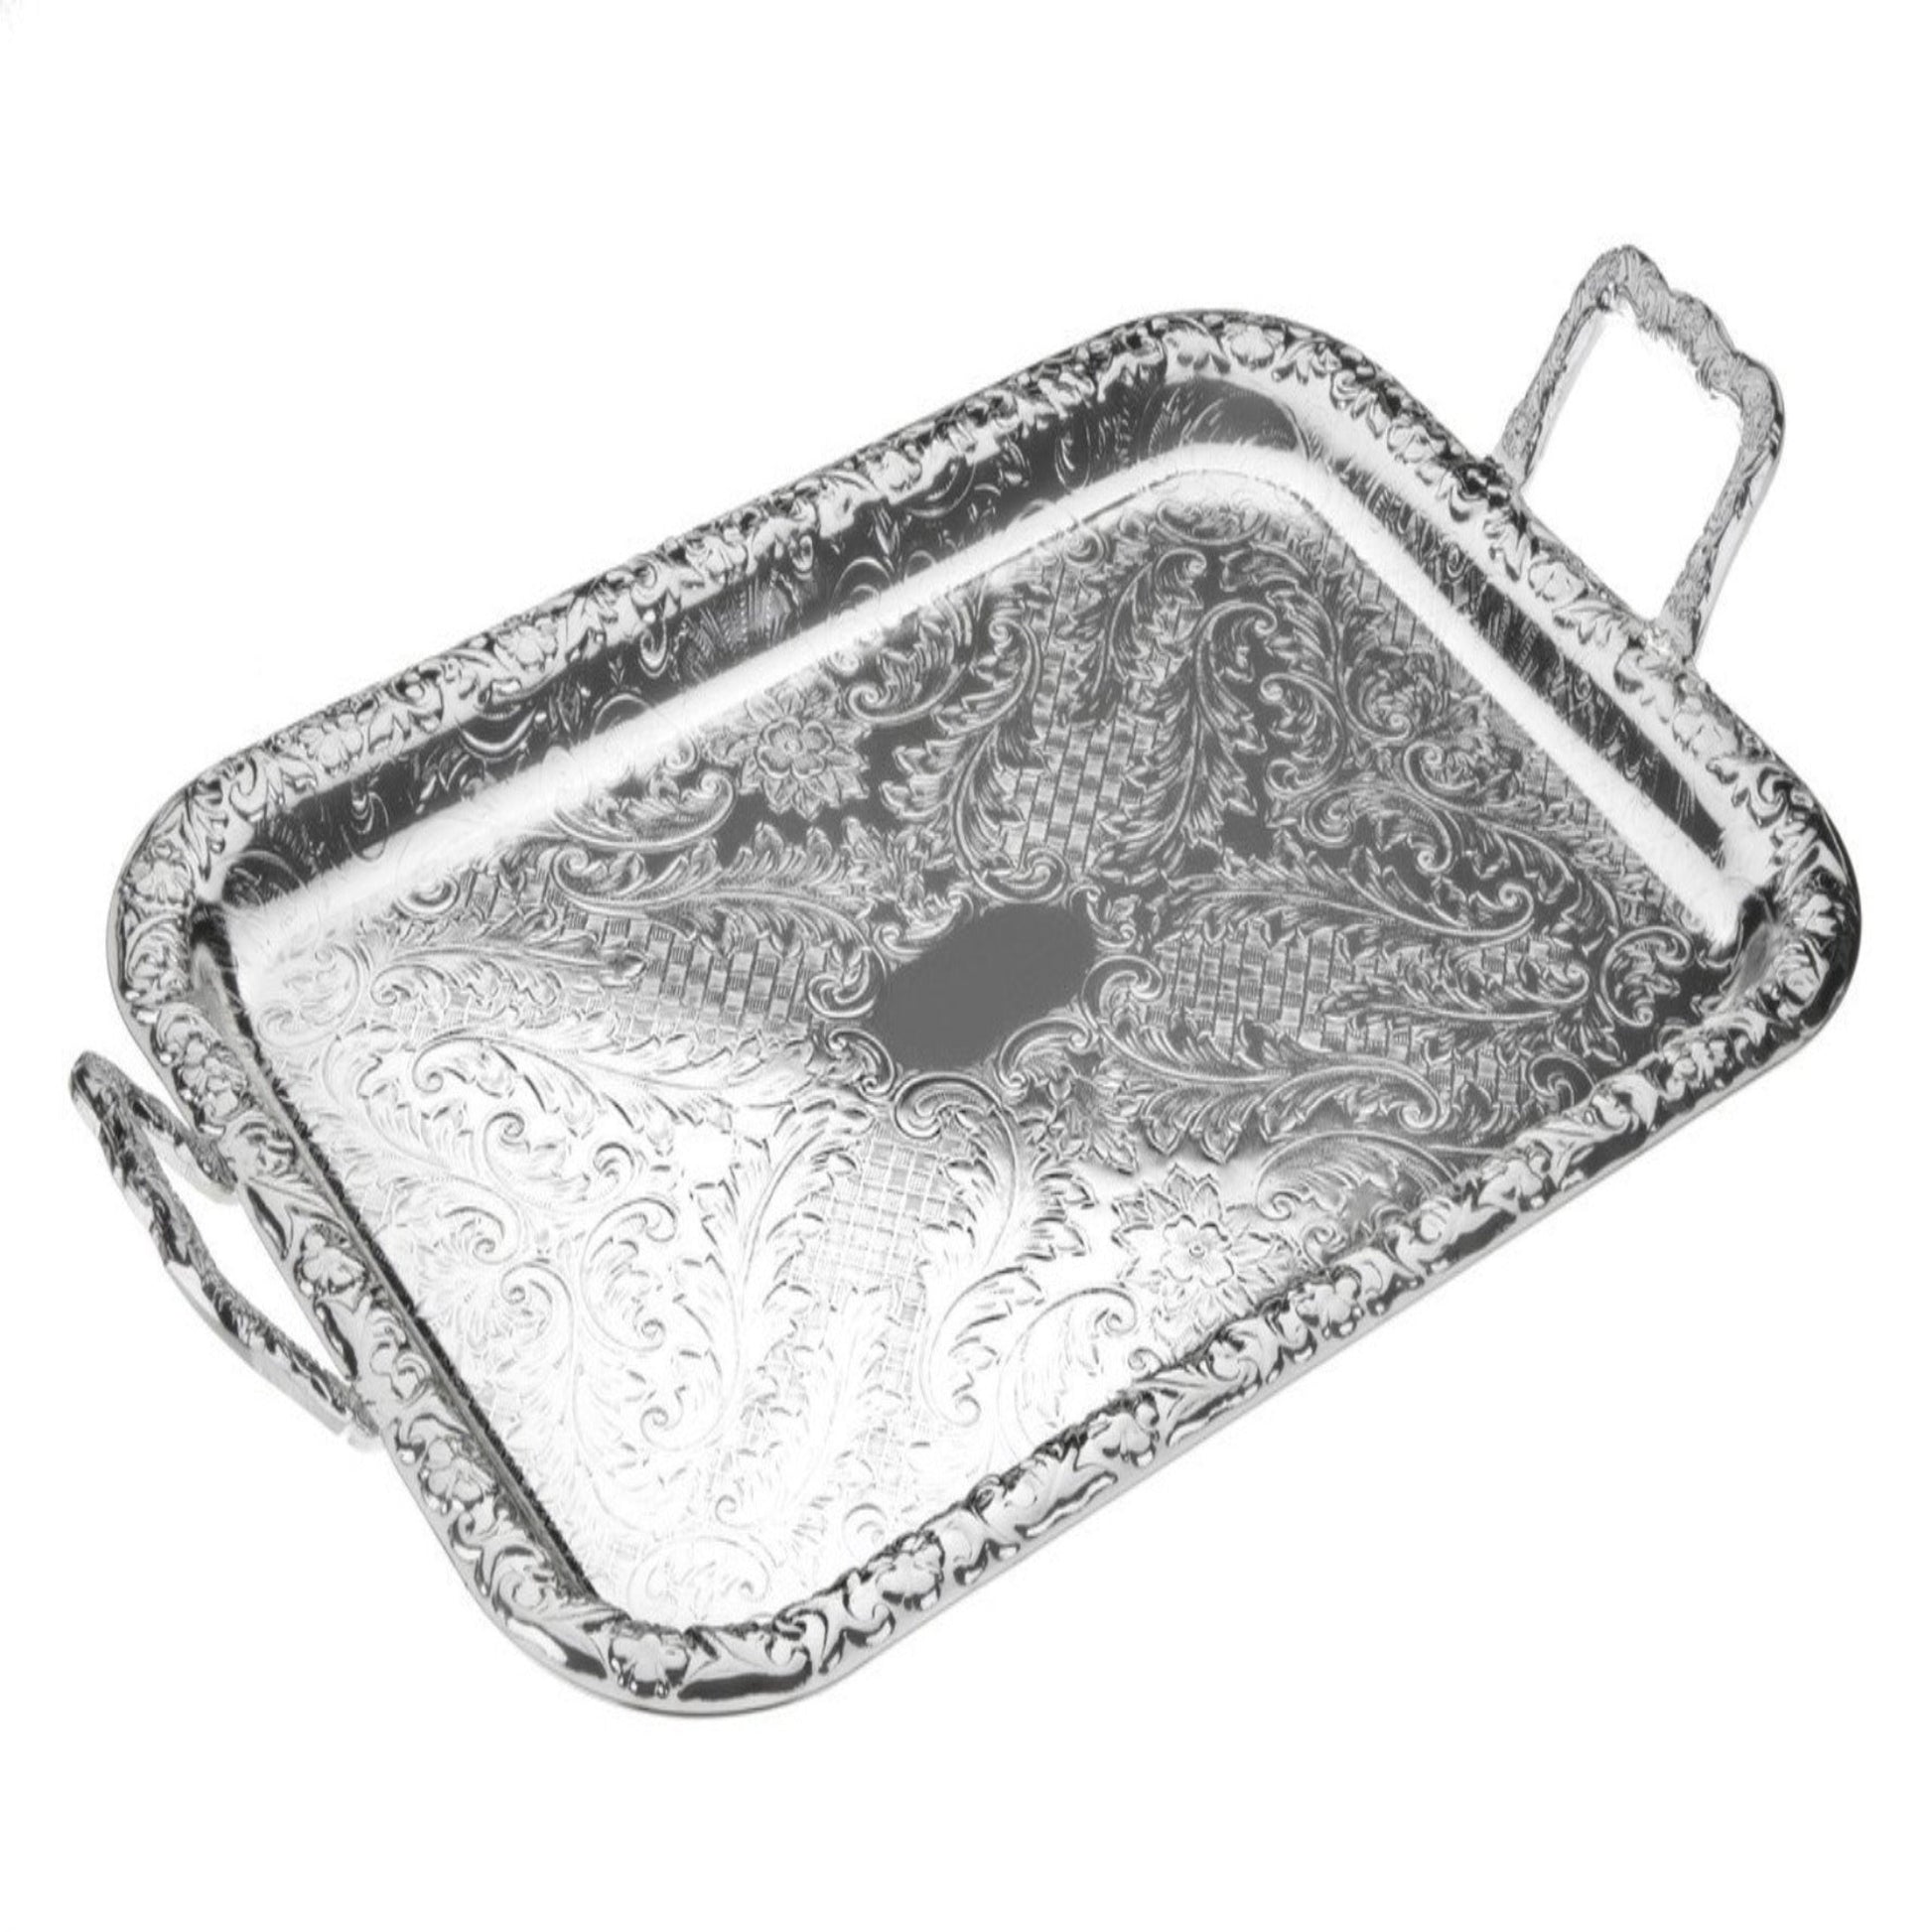 Queen Anne Tray - Silver Plated Metal - 44 x 25 cm - 26000264